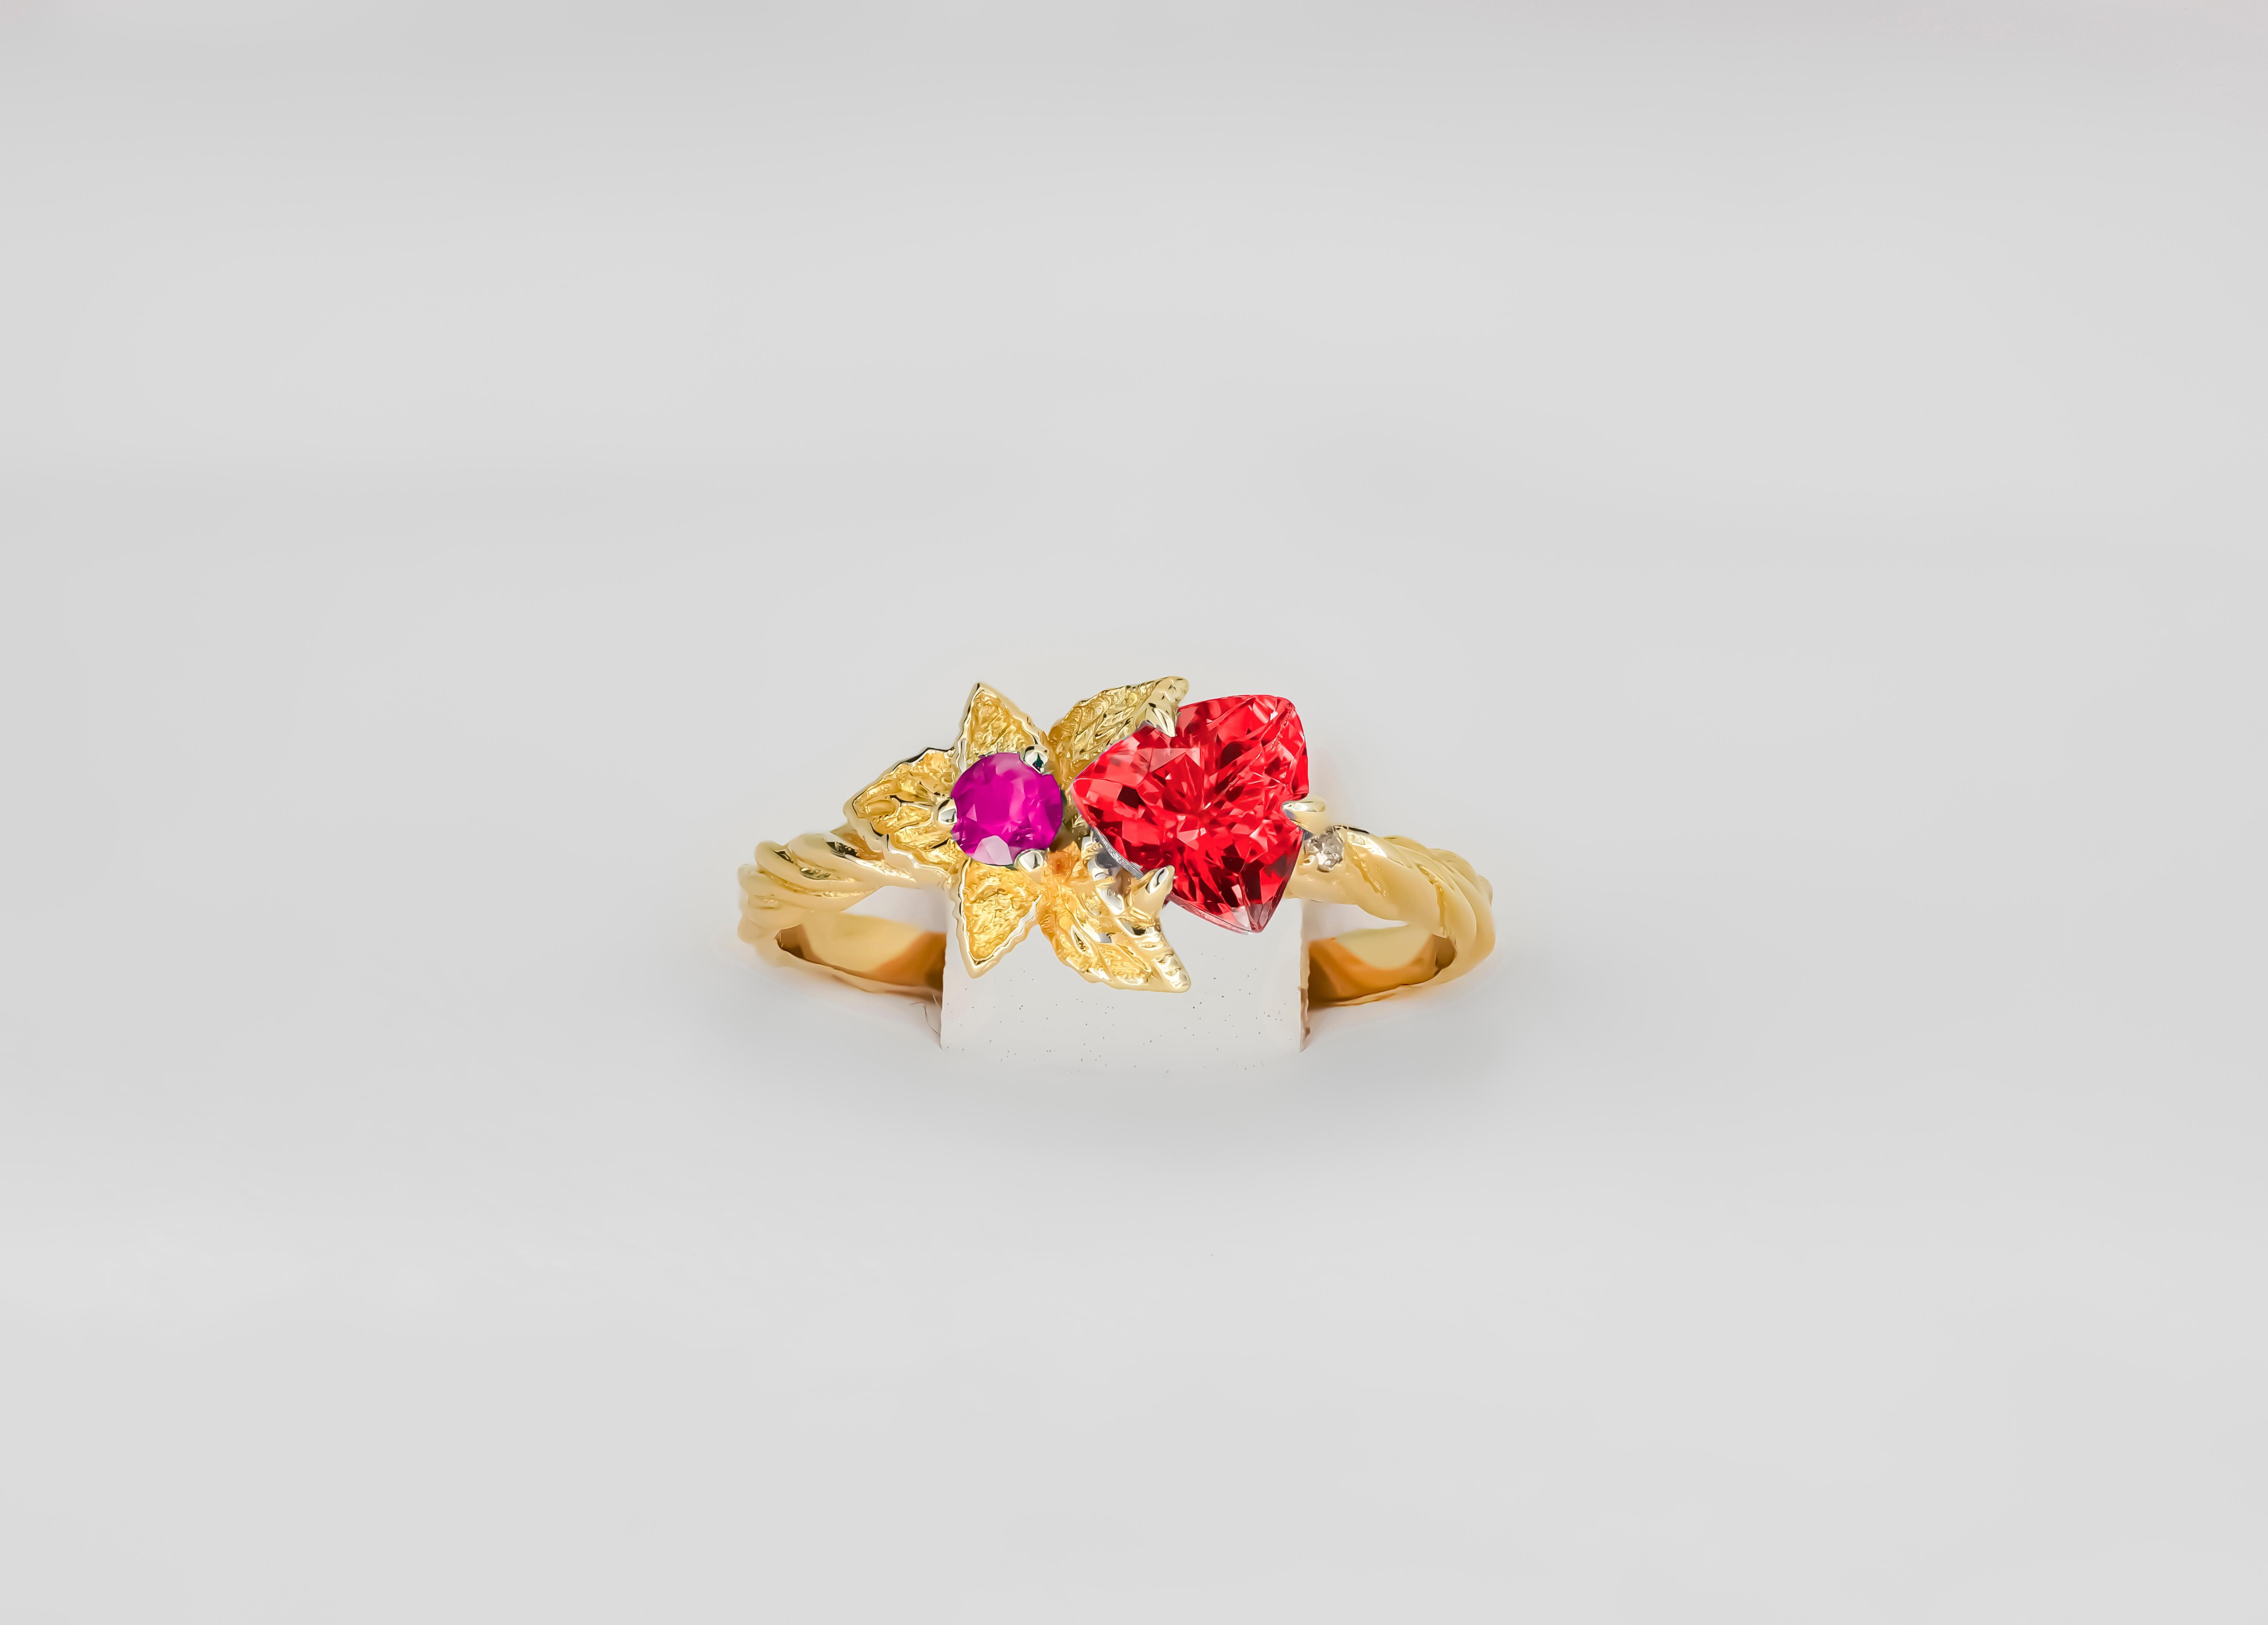 Flower red, purple gemstone 14k gold ring.
Triangle pink-red gemstone gold ring. Lab ruby, sapphire gold ring. Flower gold ring.

Weight: 2.25 g. depends from size

Gemstones:
 Lab ruby, weight: approx 0.45-0.50 ct, cut - trillion, pink color
 Lab